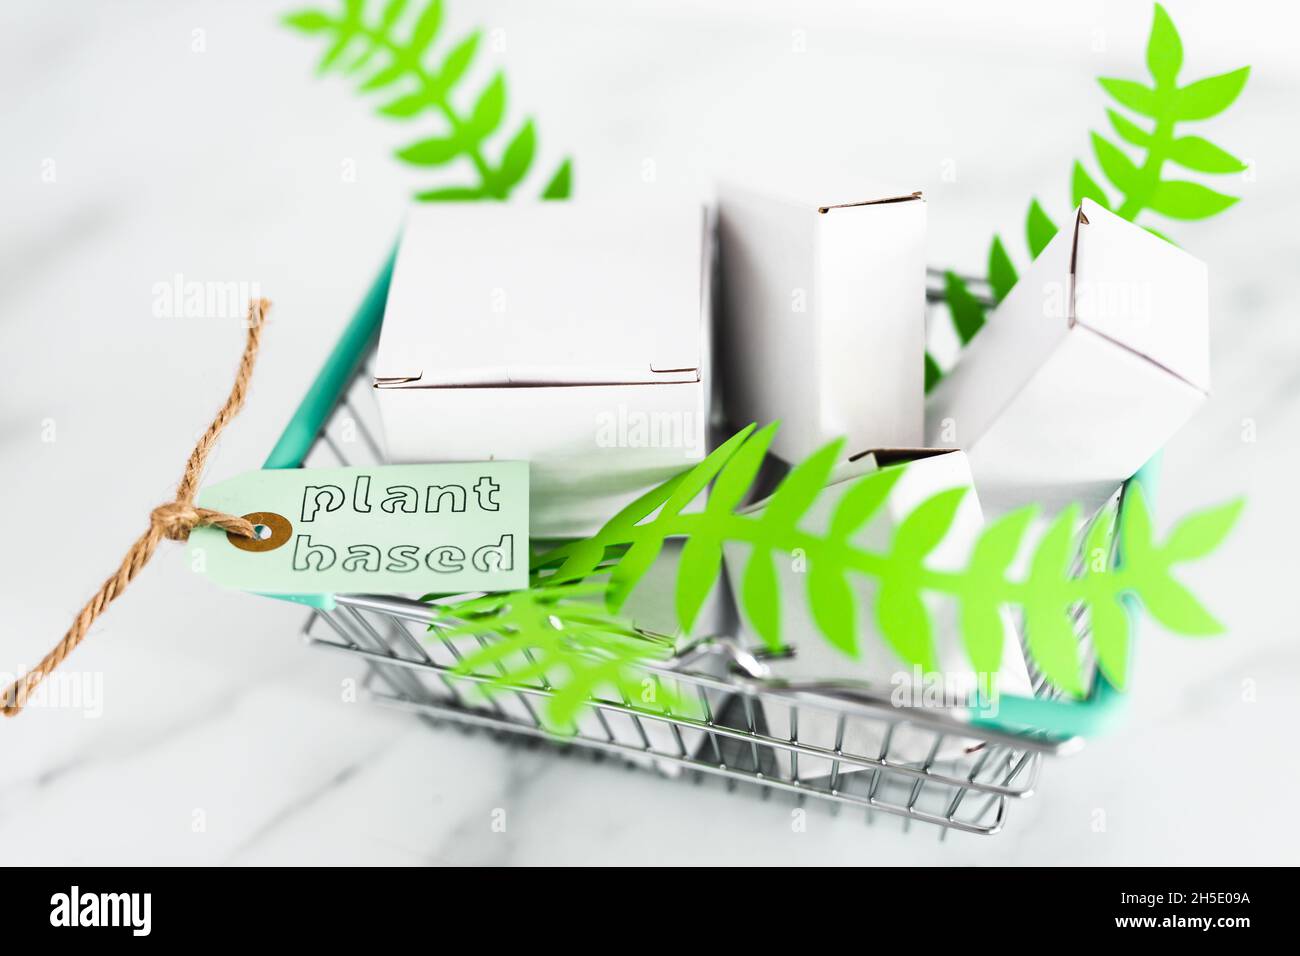 sustainability and cruelty free product concept, shopping basket with blank product packagings and green leaves with Plant-based label on them Stock Photo